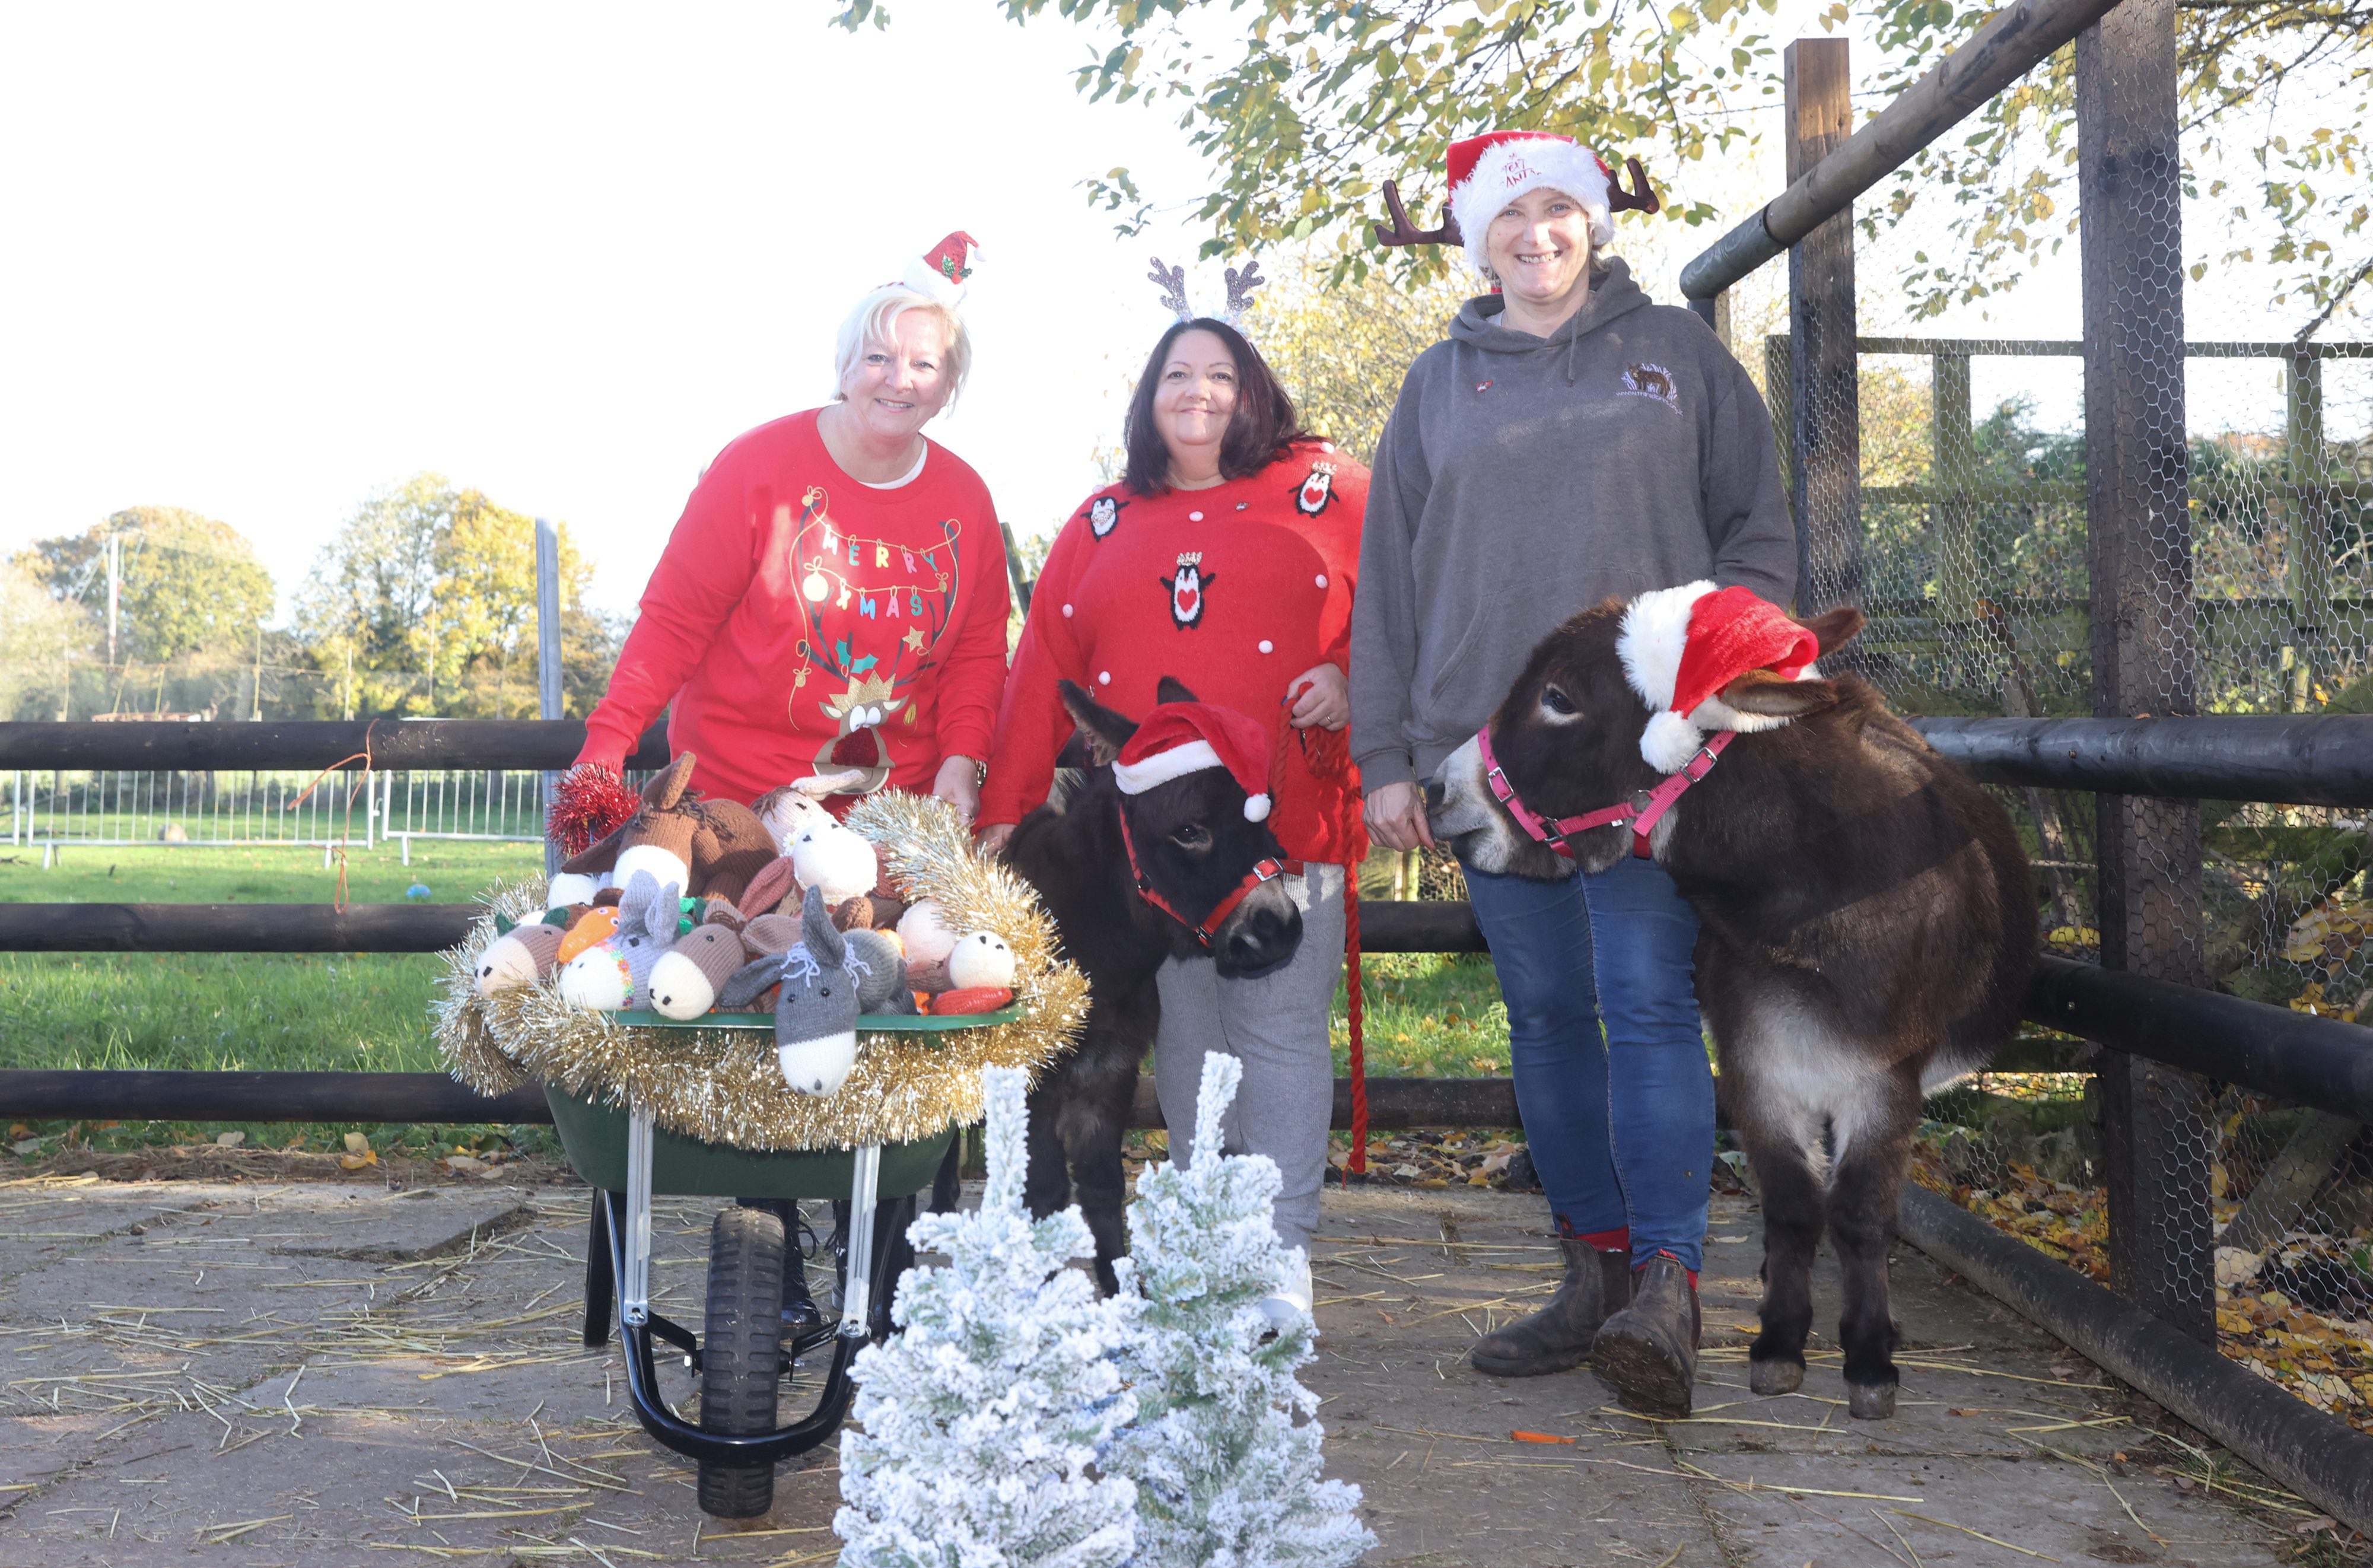 Funds raised through sale of the knitted toys will help keep the miniature donkeys fed through the winter months. (National Lottery/ PA)